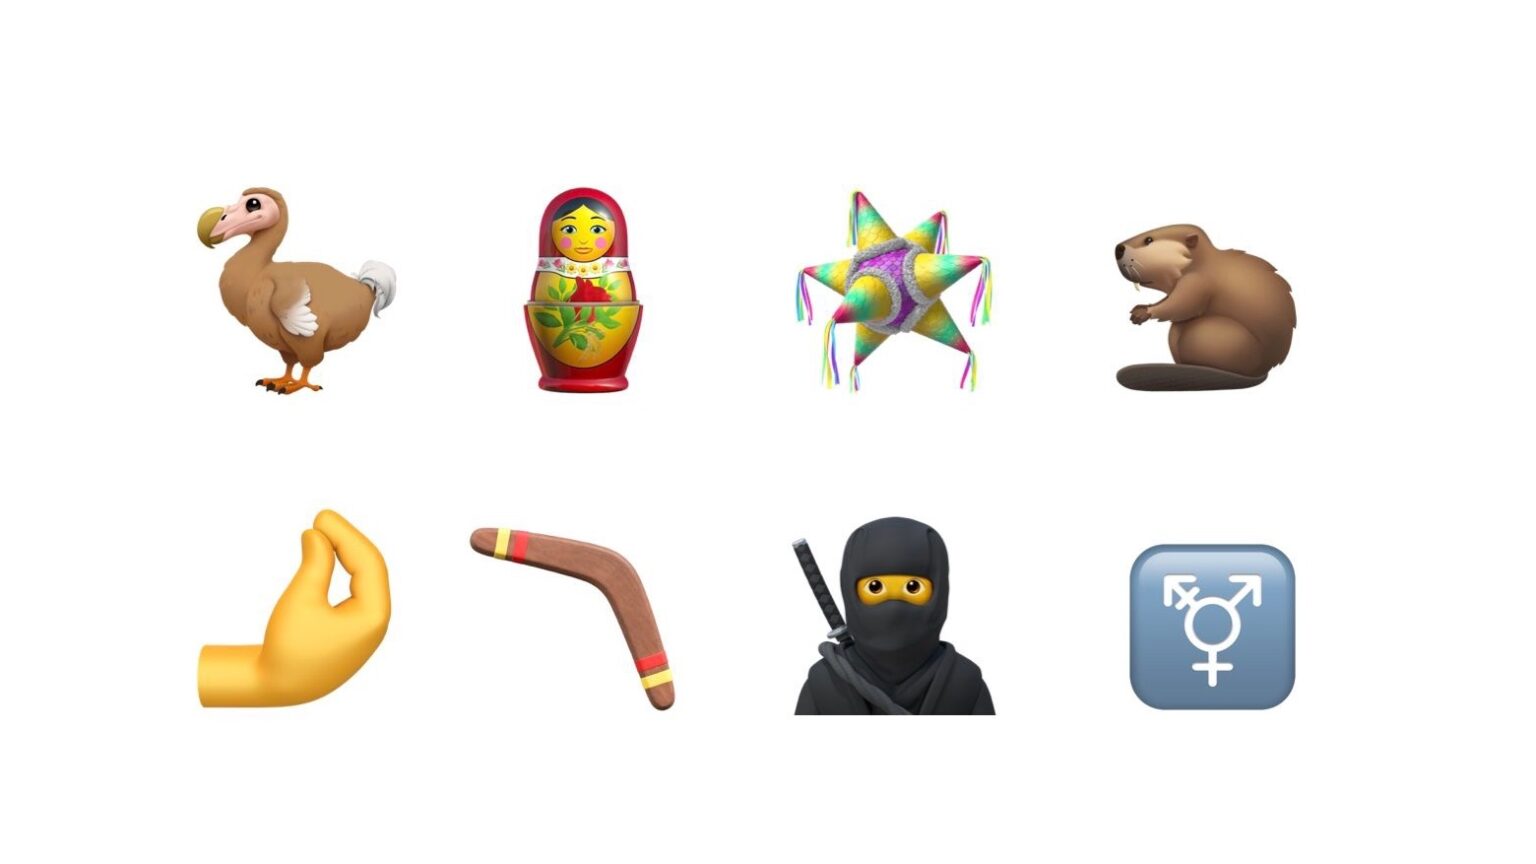 iOS 14.2 beta 2 is all be out emoji.